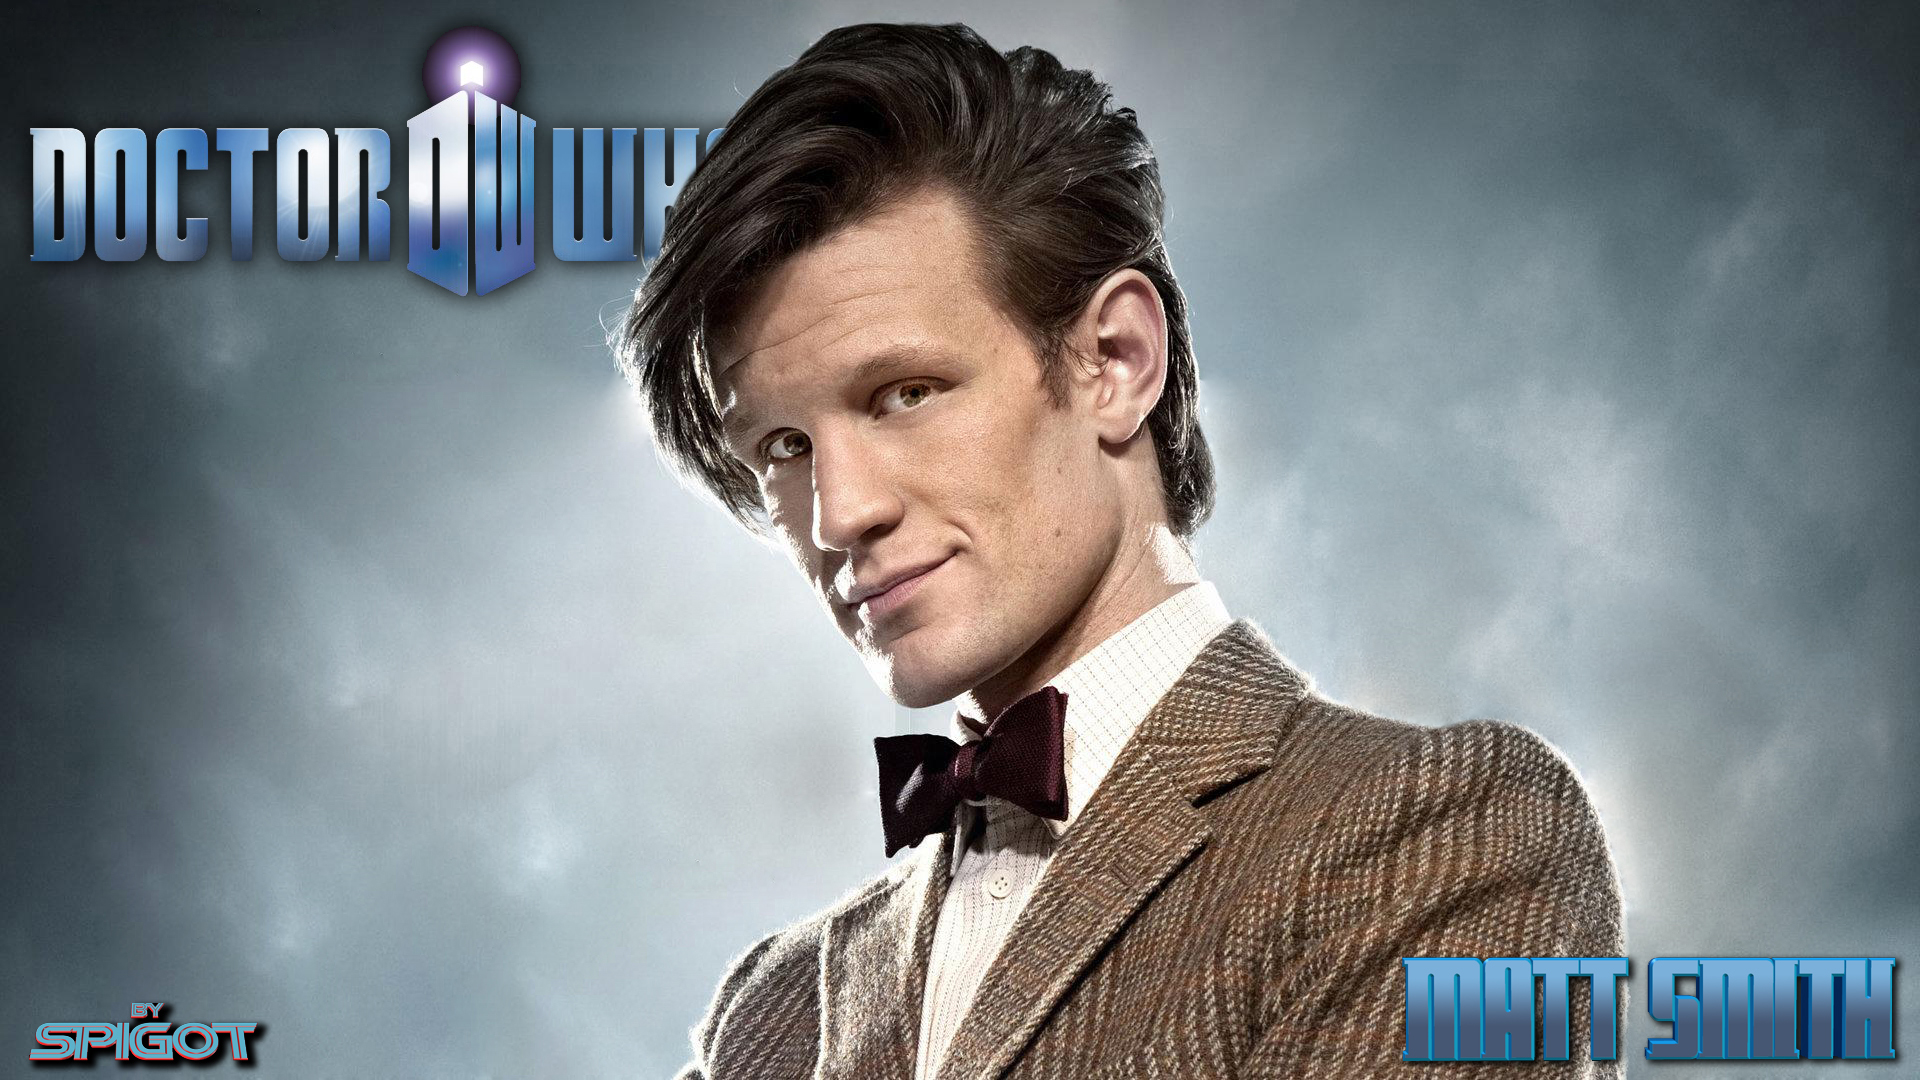 Doctor Who 11th Doctor 1920x1080